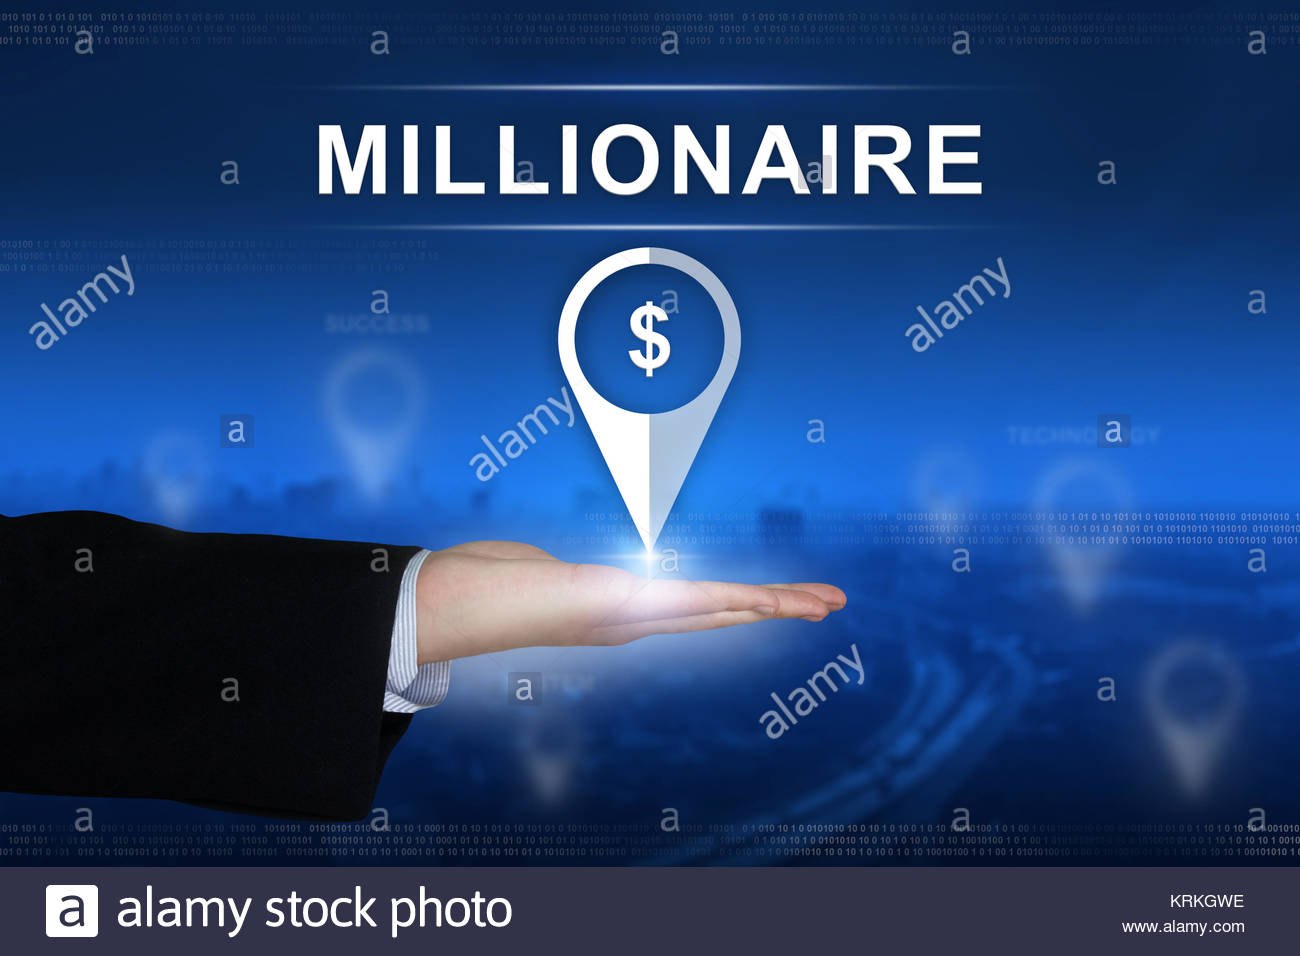 Millionaire Button On Blurred Background Stock Photo